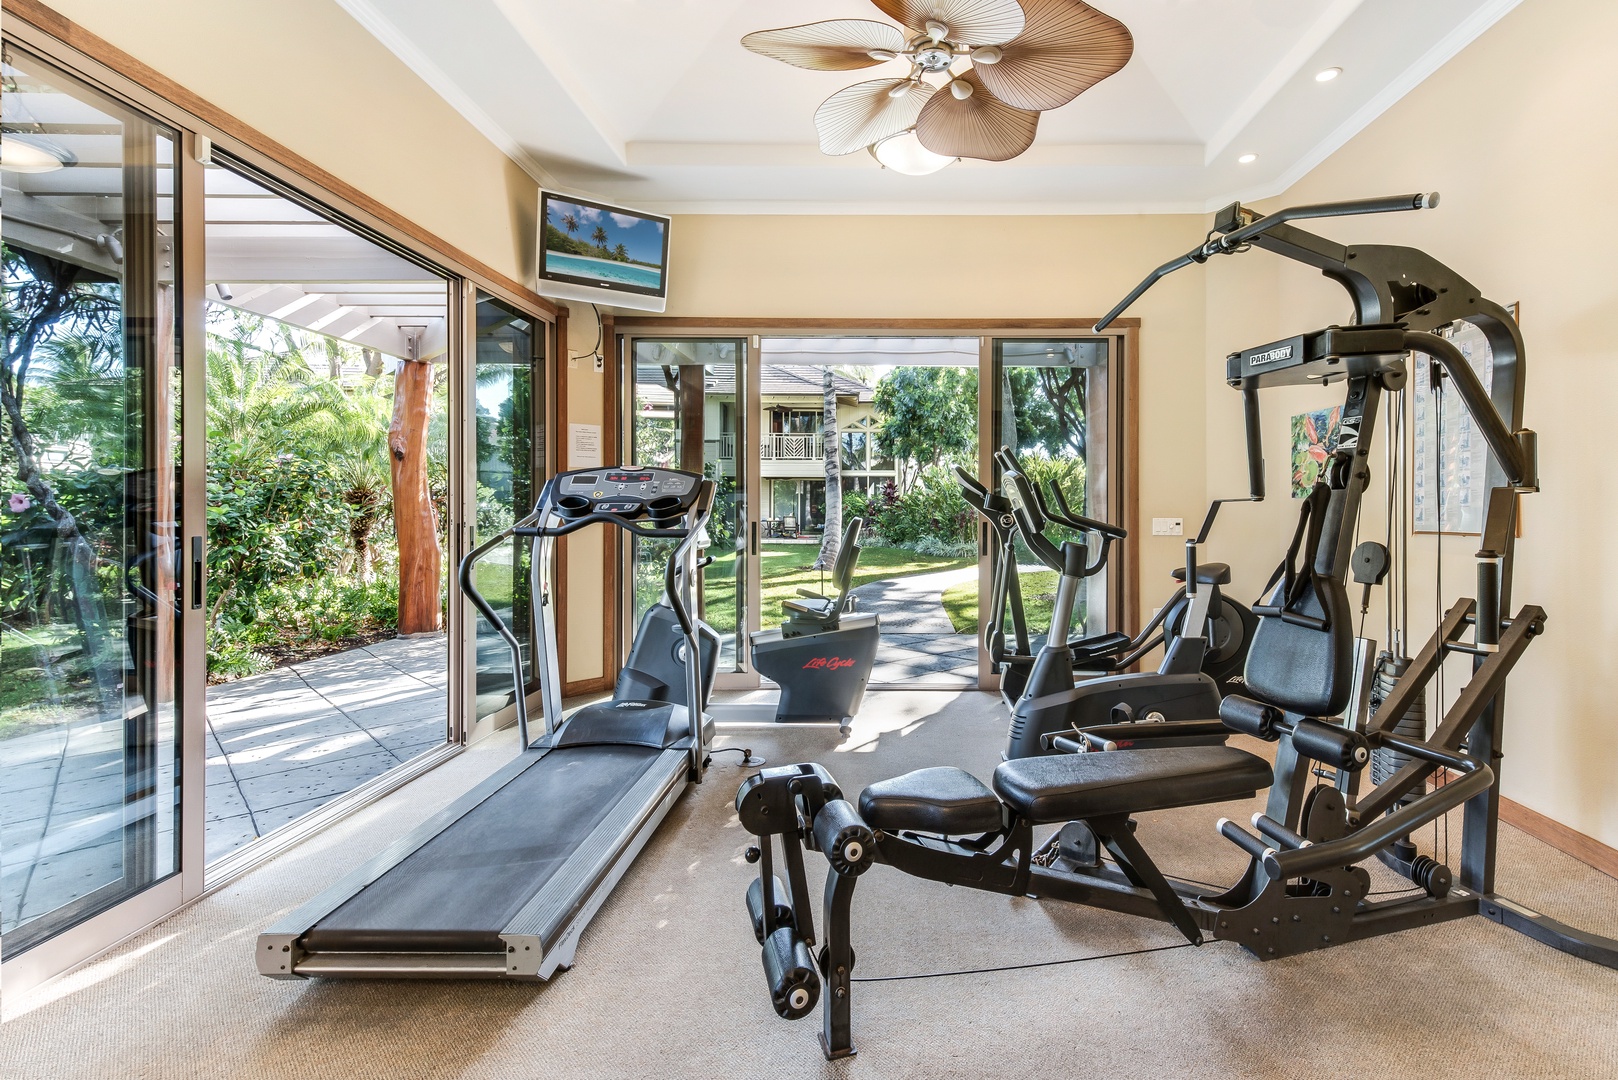 Kamuela Vacation Rentals, Palm Villas E1 - The fitness center is also available for guests who want to keep up their fitness routine while on vacation.